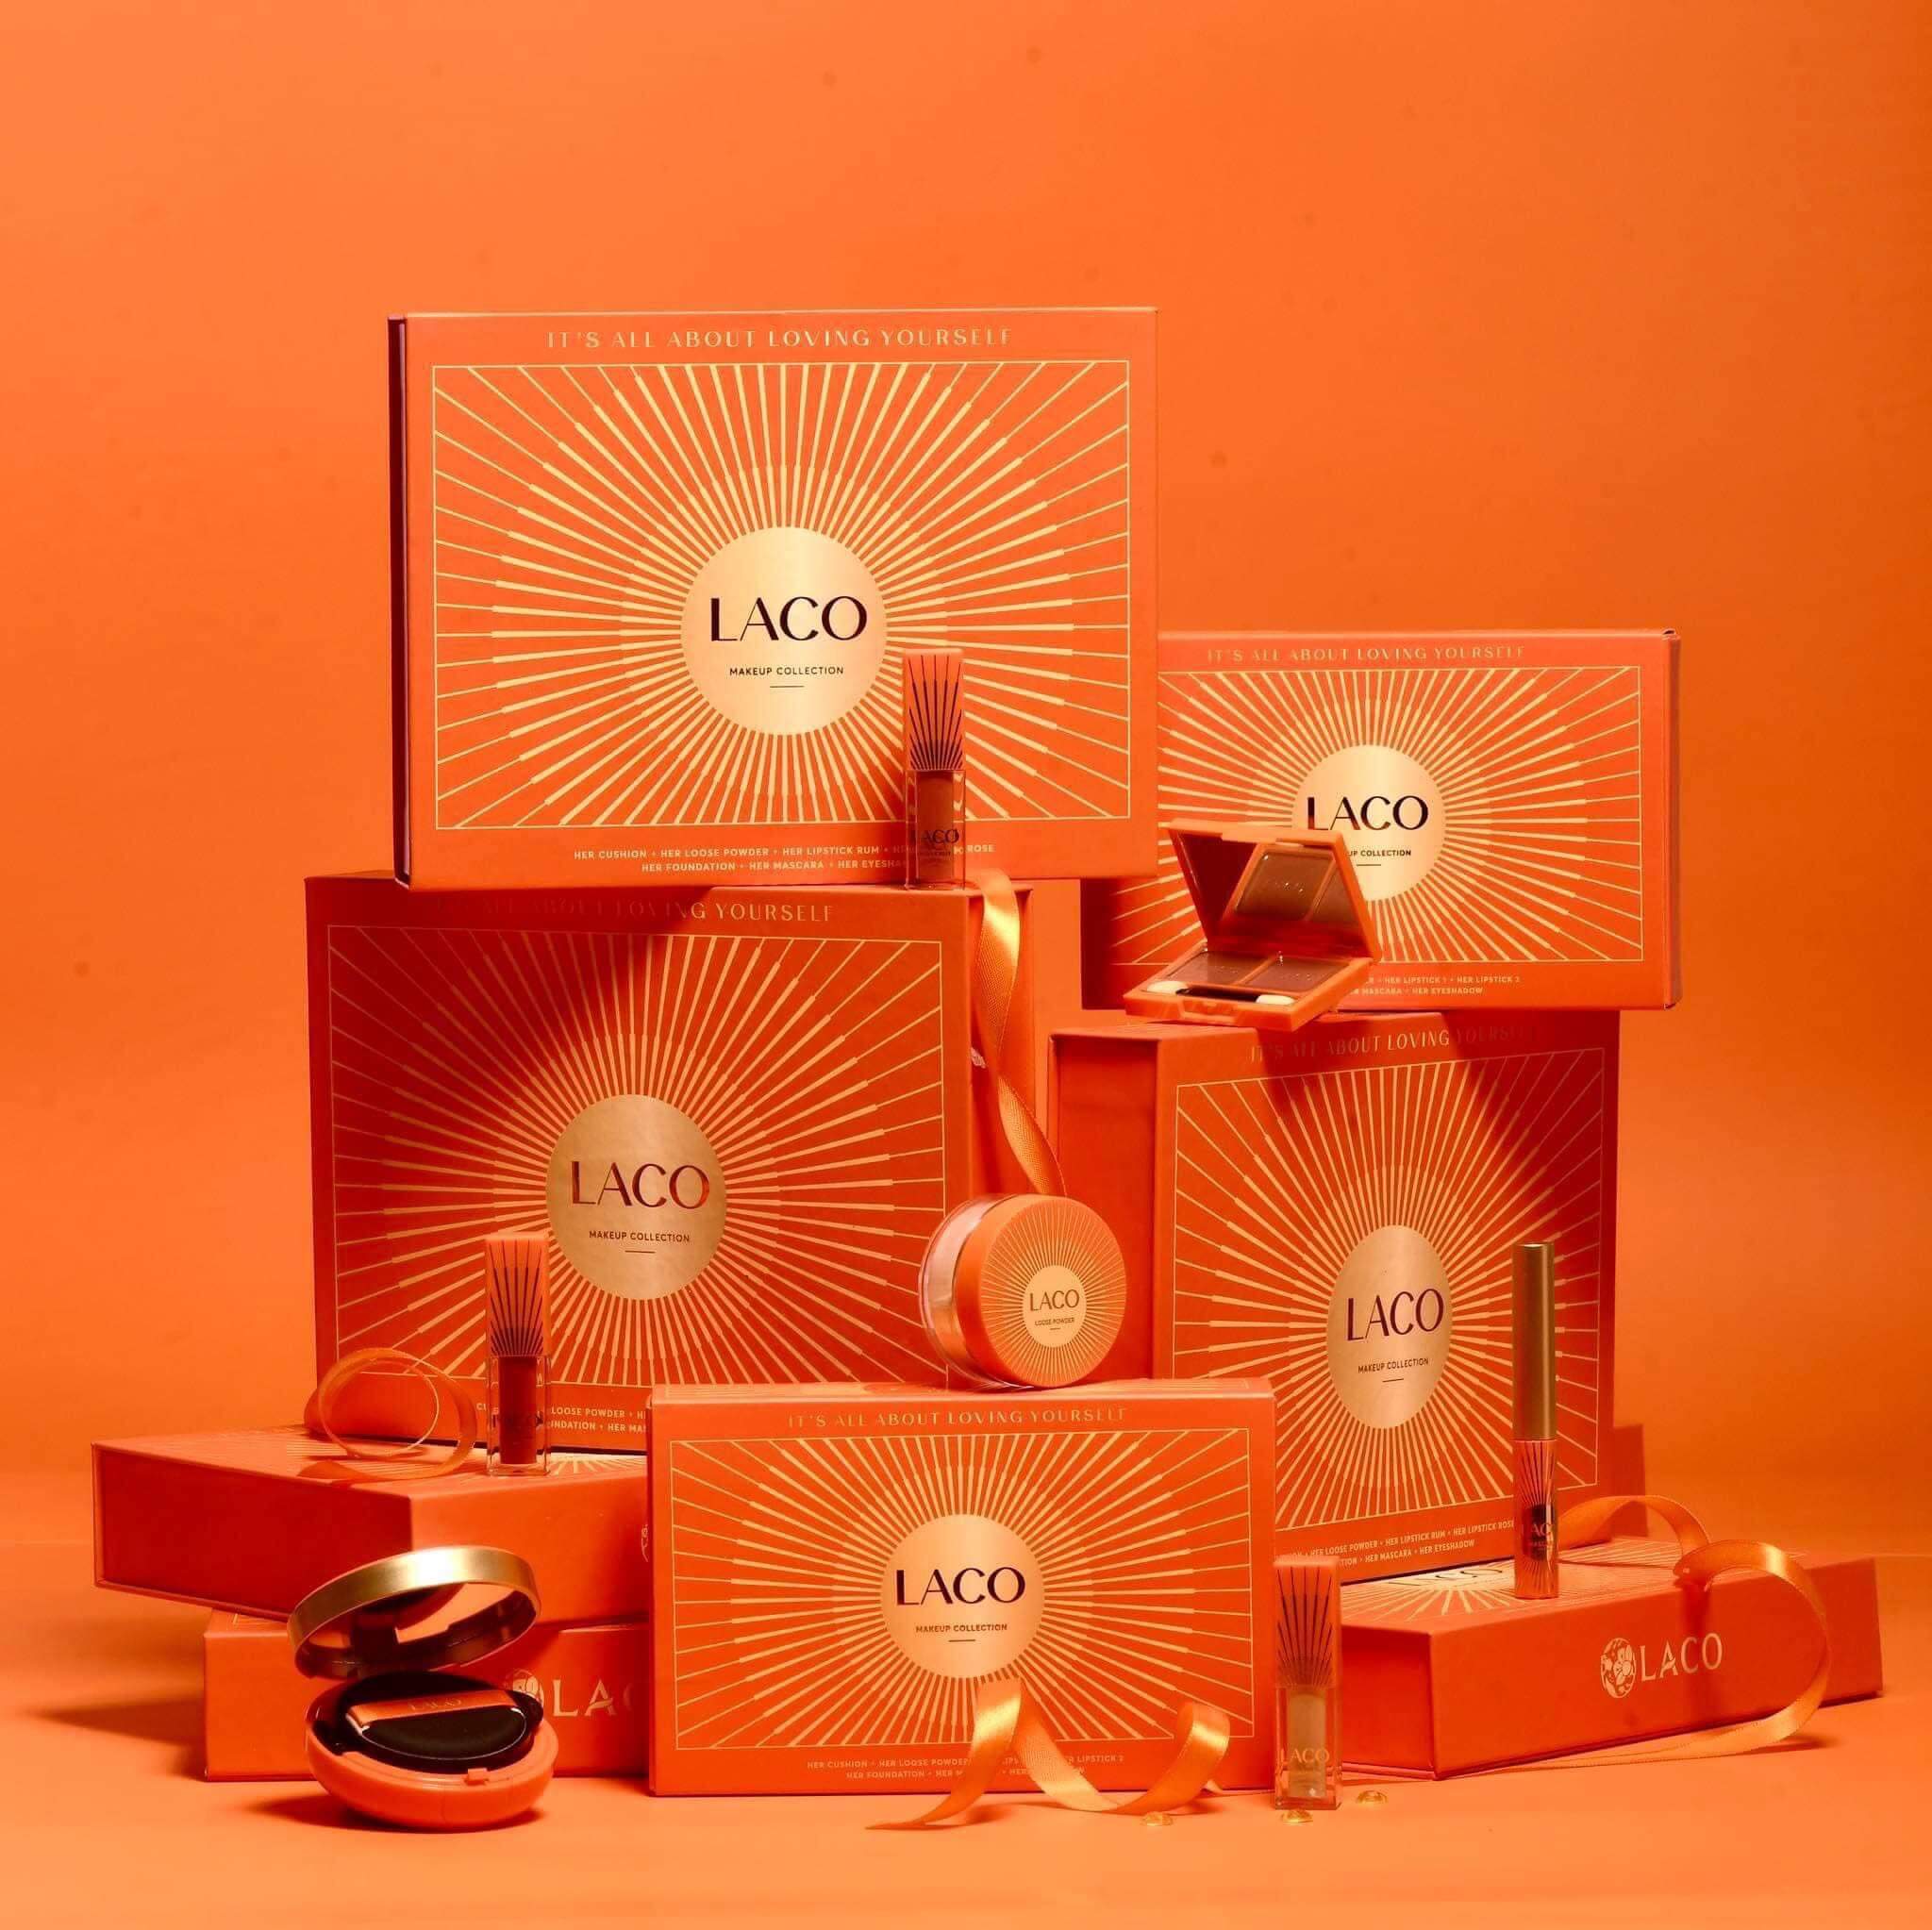 Laco make-up collection